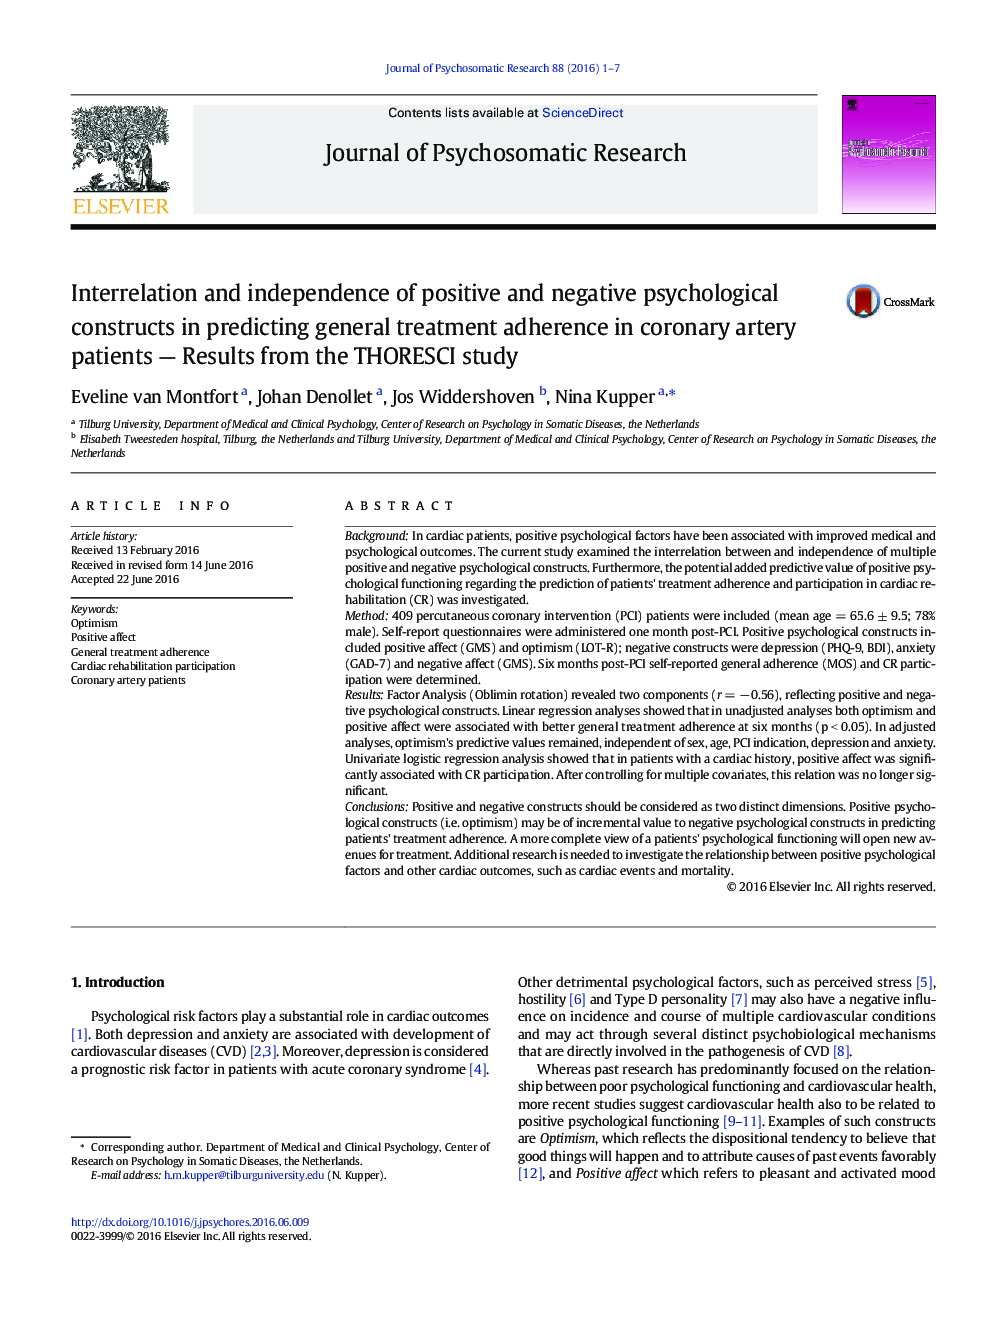 Interrelation and independence of positive and negative psychological constructs in predicting general treatment adherence in coronary artery patients — Results from the THORESCI study